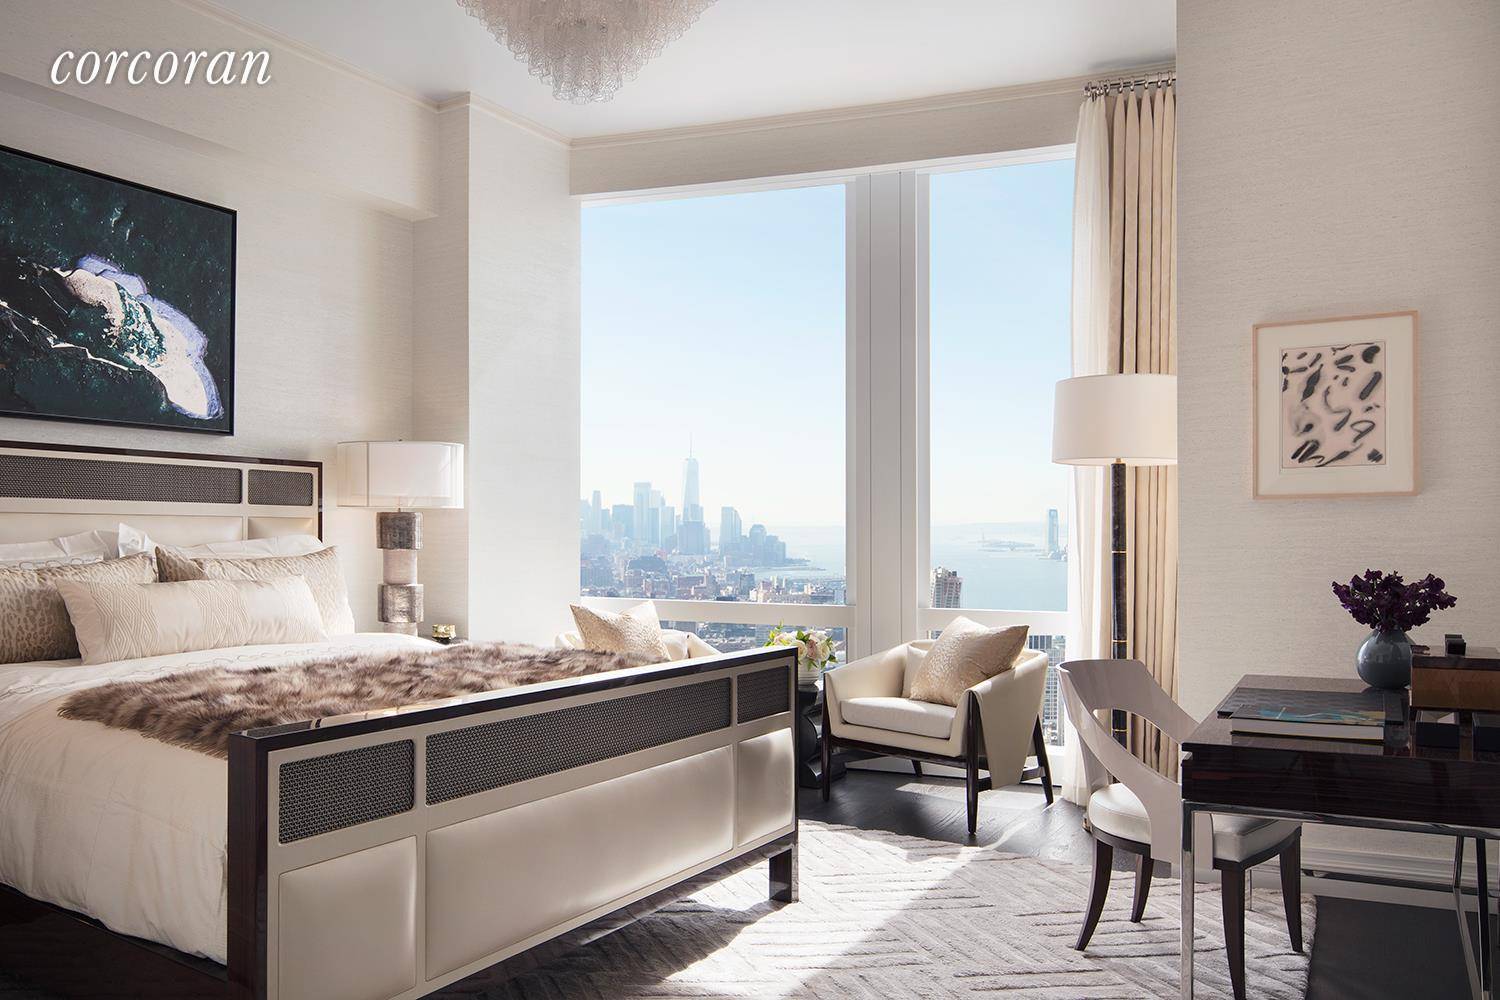 LIVE WHERE IT ALL COMES TOGETHER35 Hudson Yards, the tallest residential building at Hudson Yards, was designed by David Childs SOM featuring a beautiful facade of Bavarian limestone, while the ...